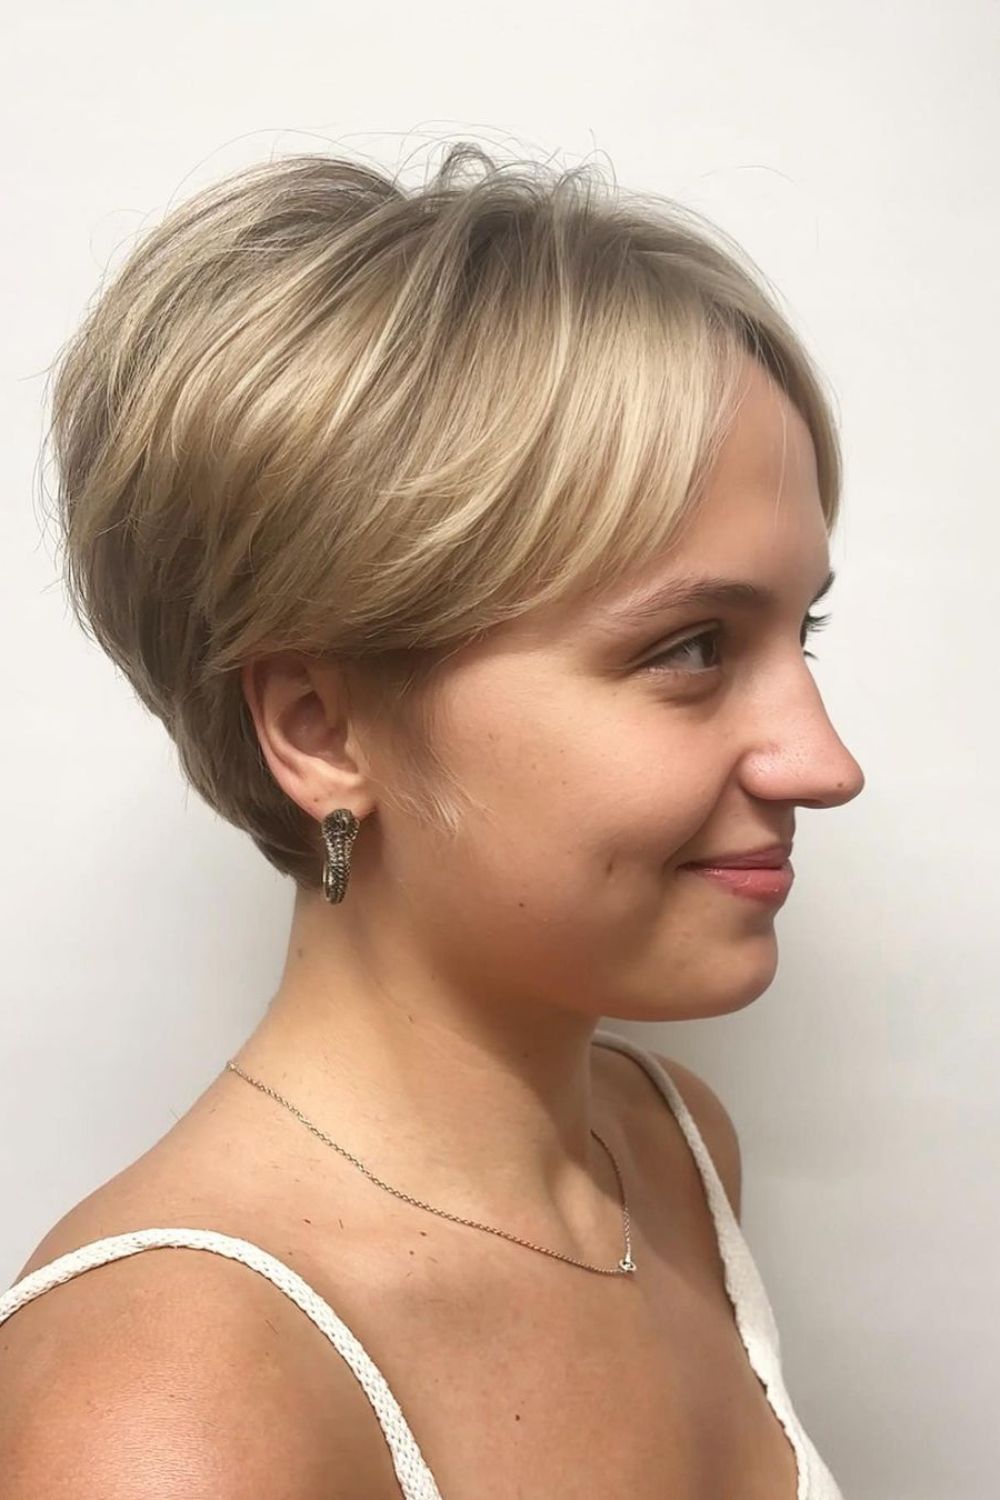 A woman with a blonde long pixie cut.